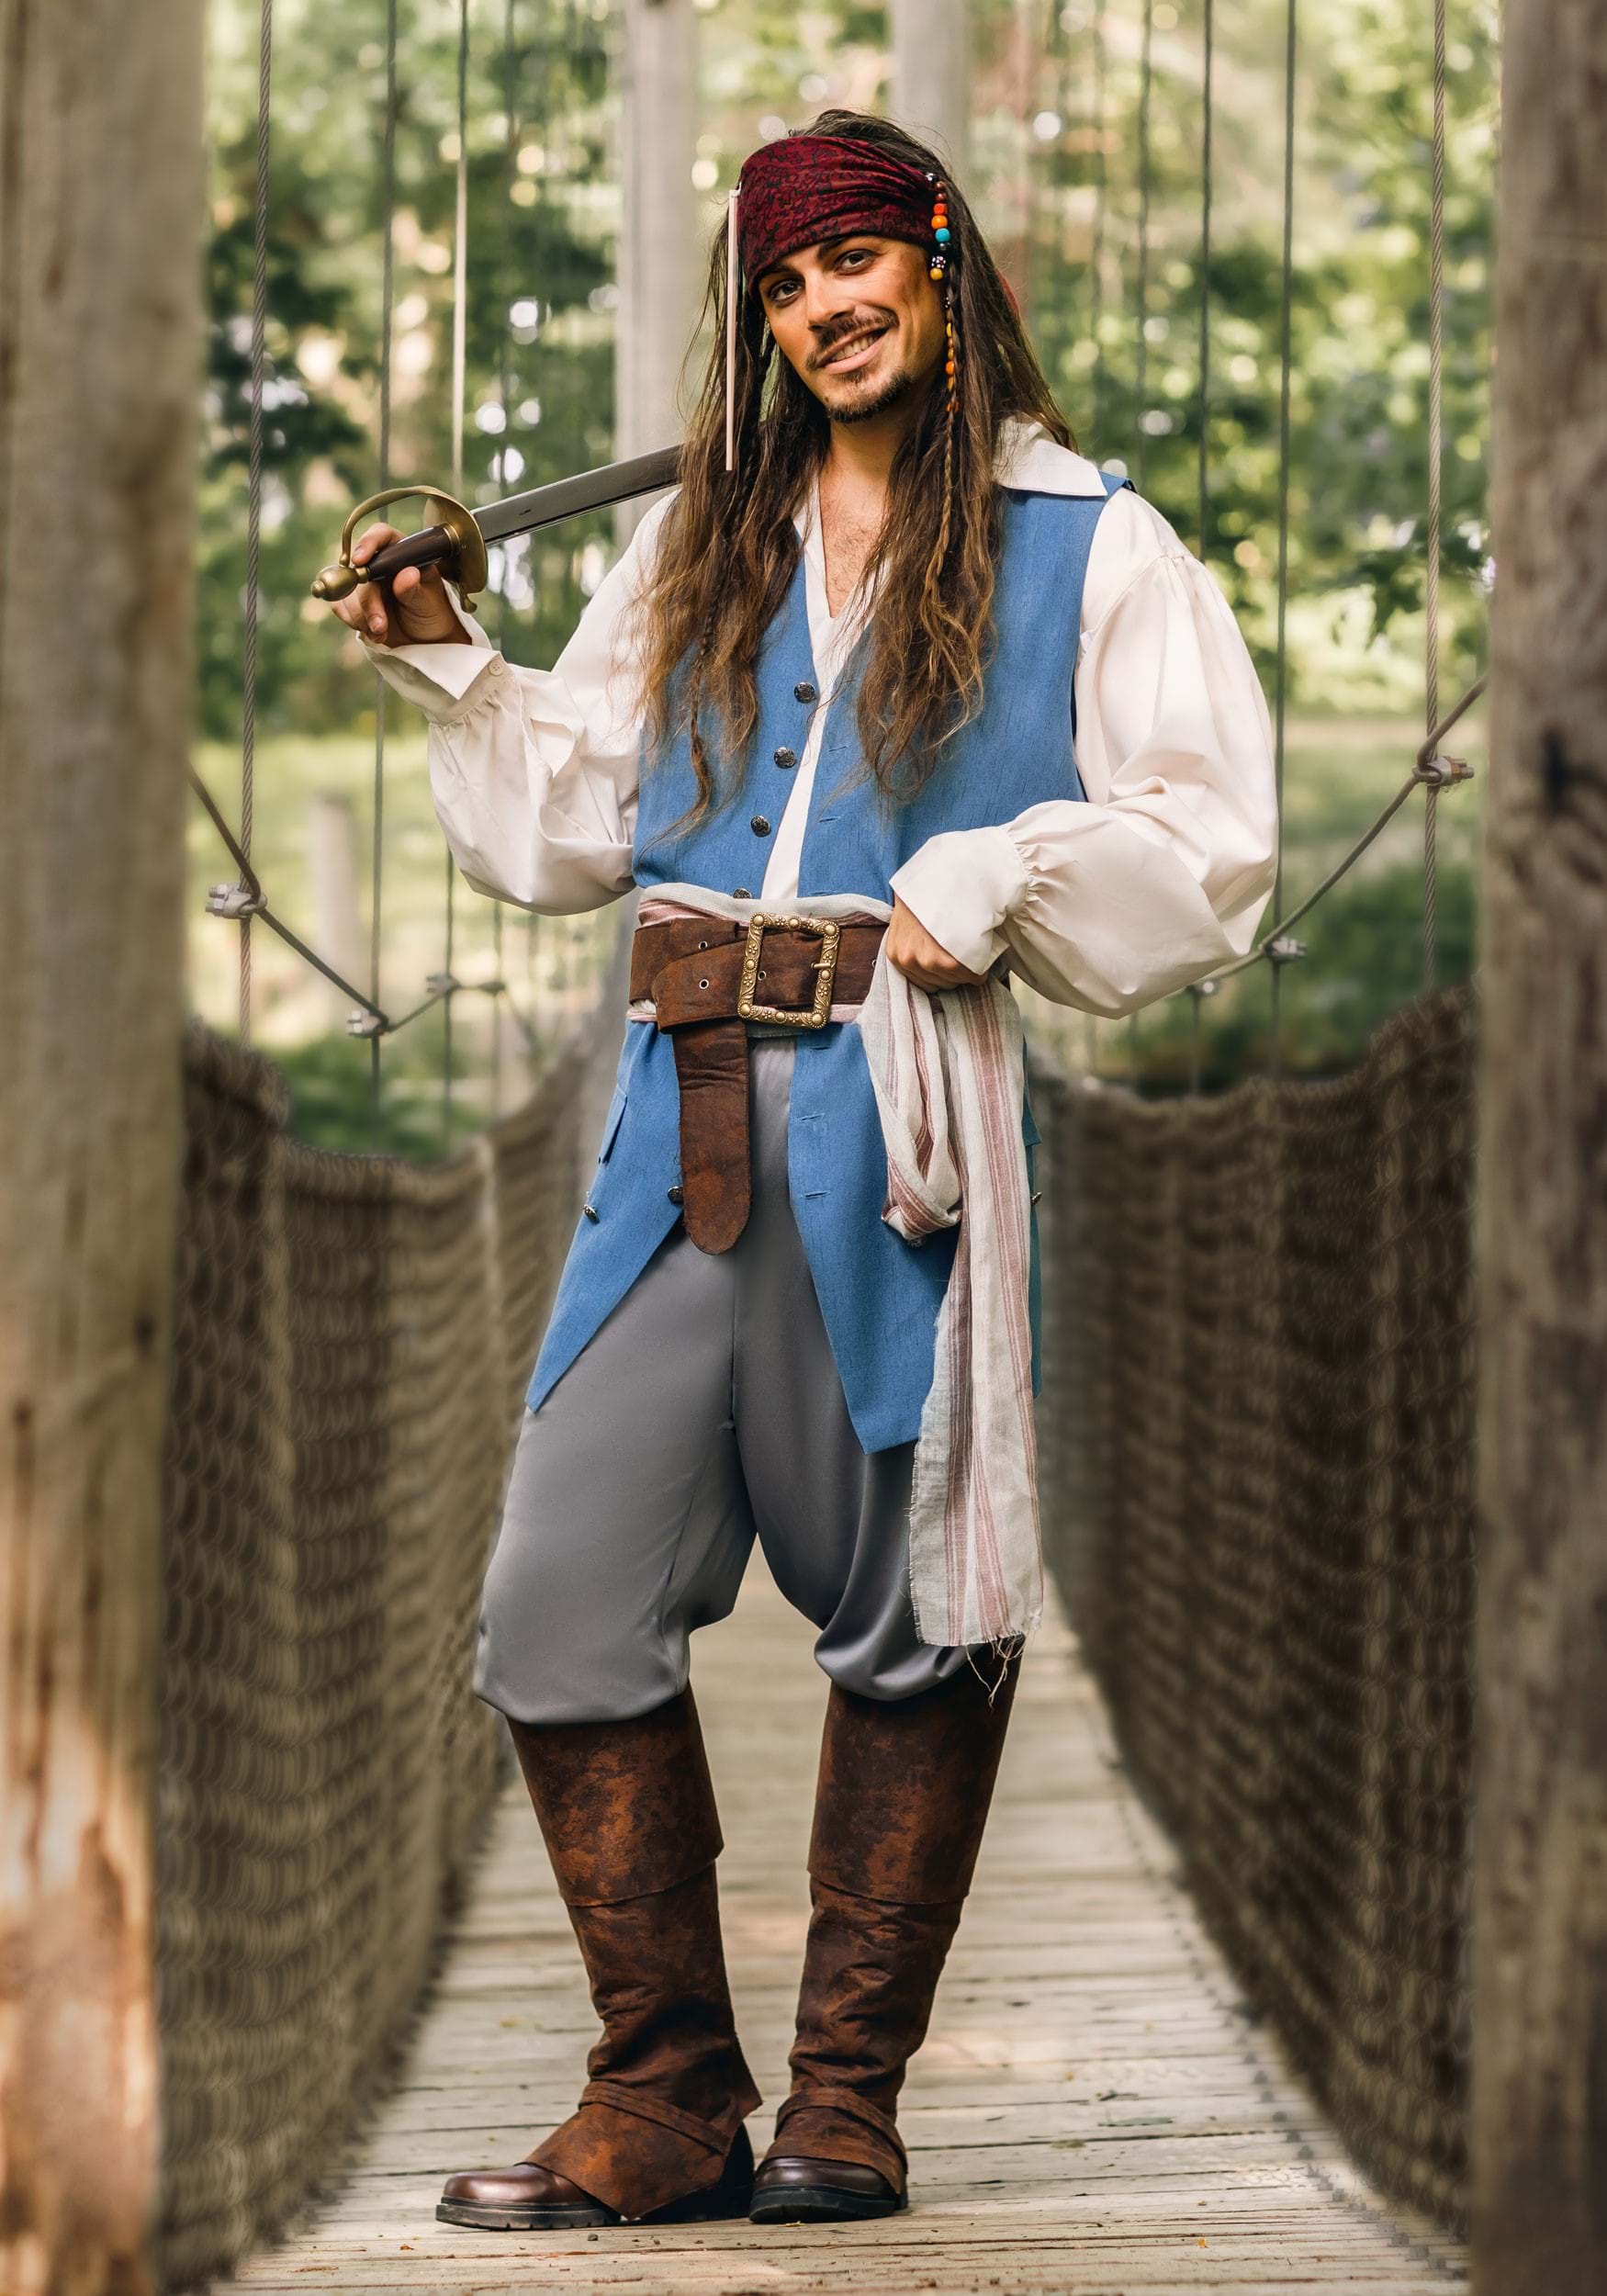 halloween costume for men adult pirate captain jack sparrow wigs hat  pirates of the caribbean cosplay